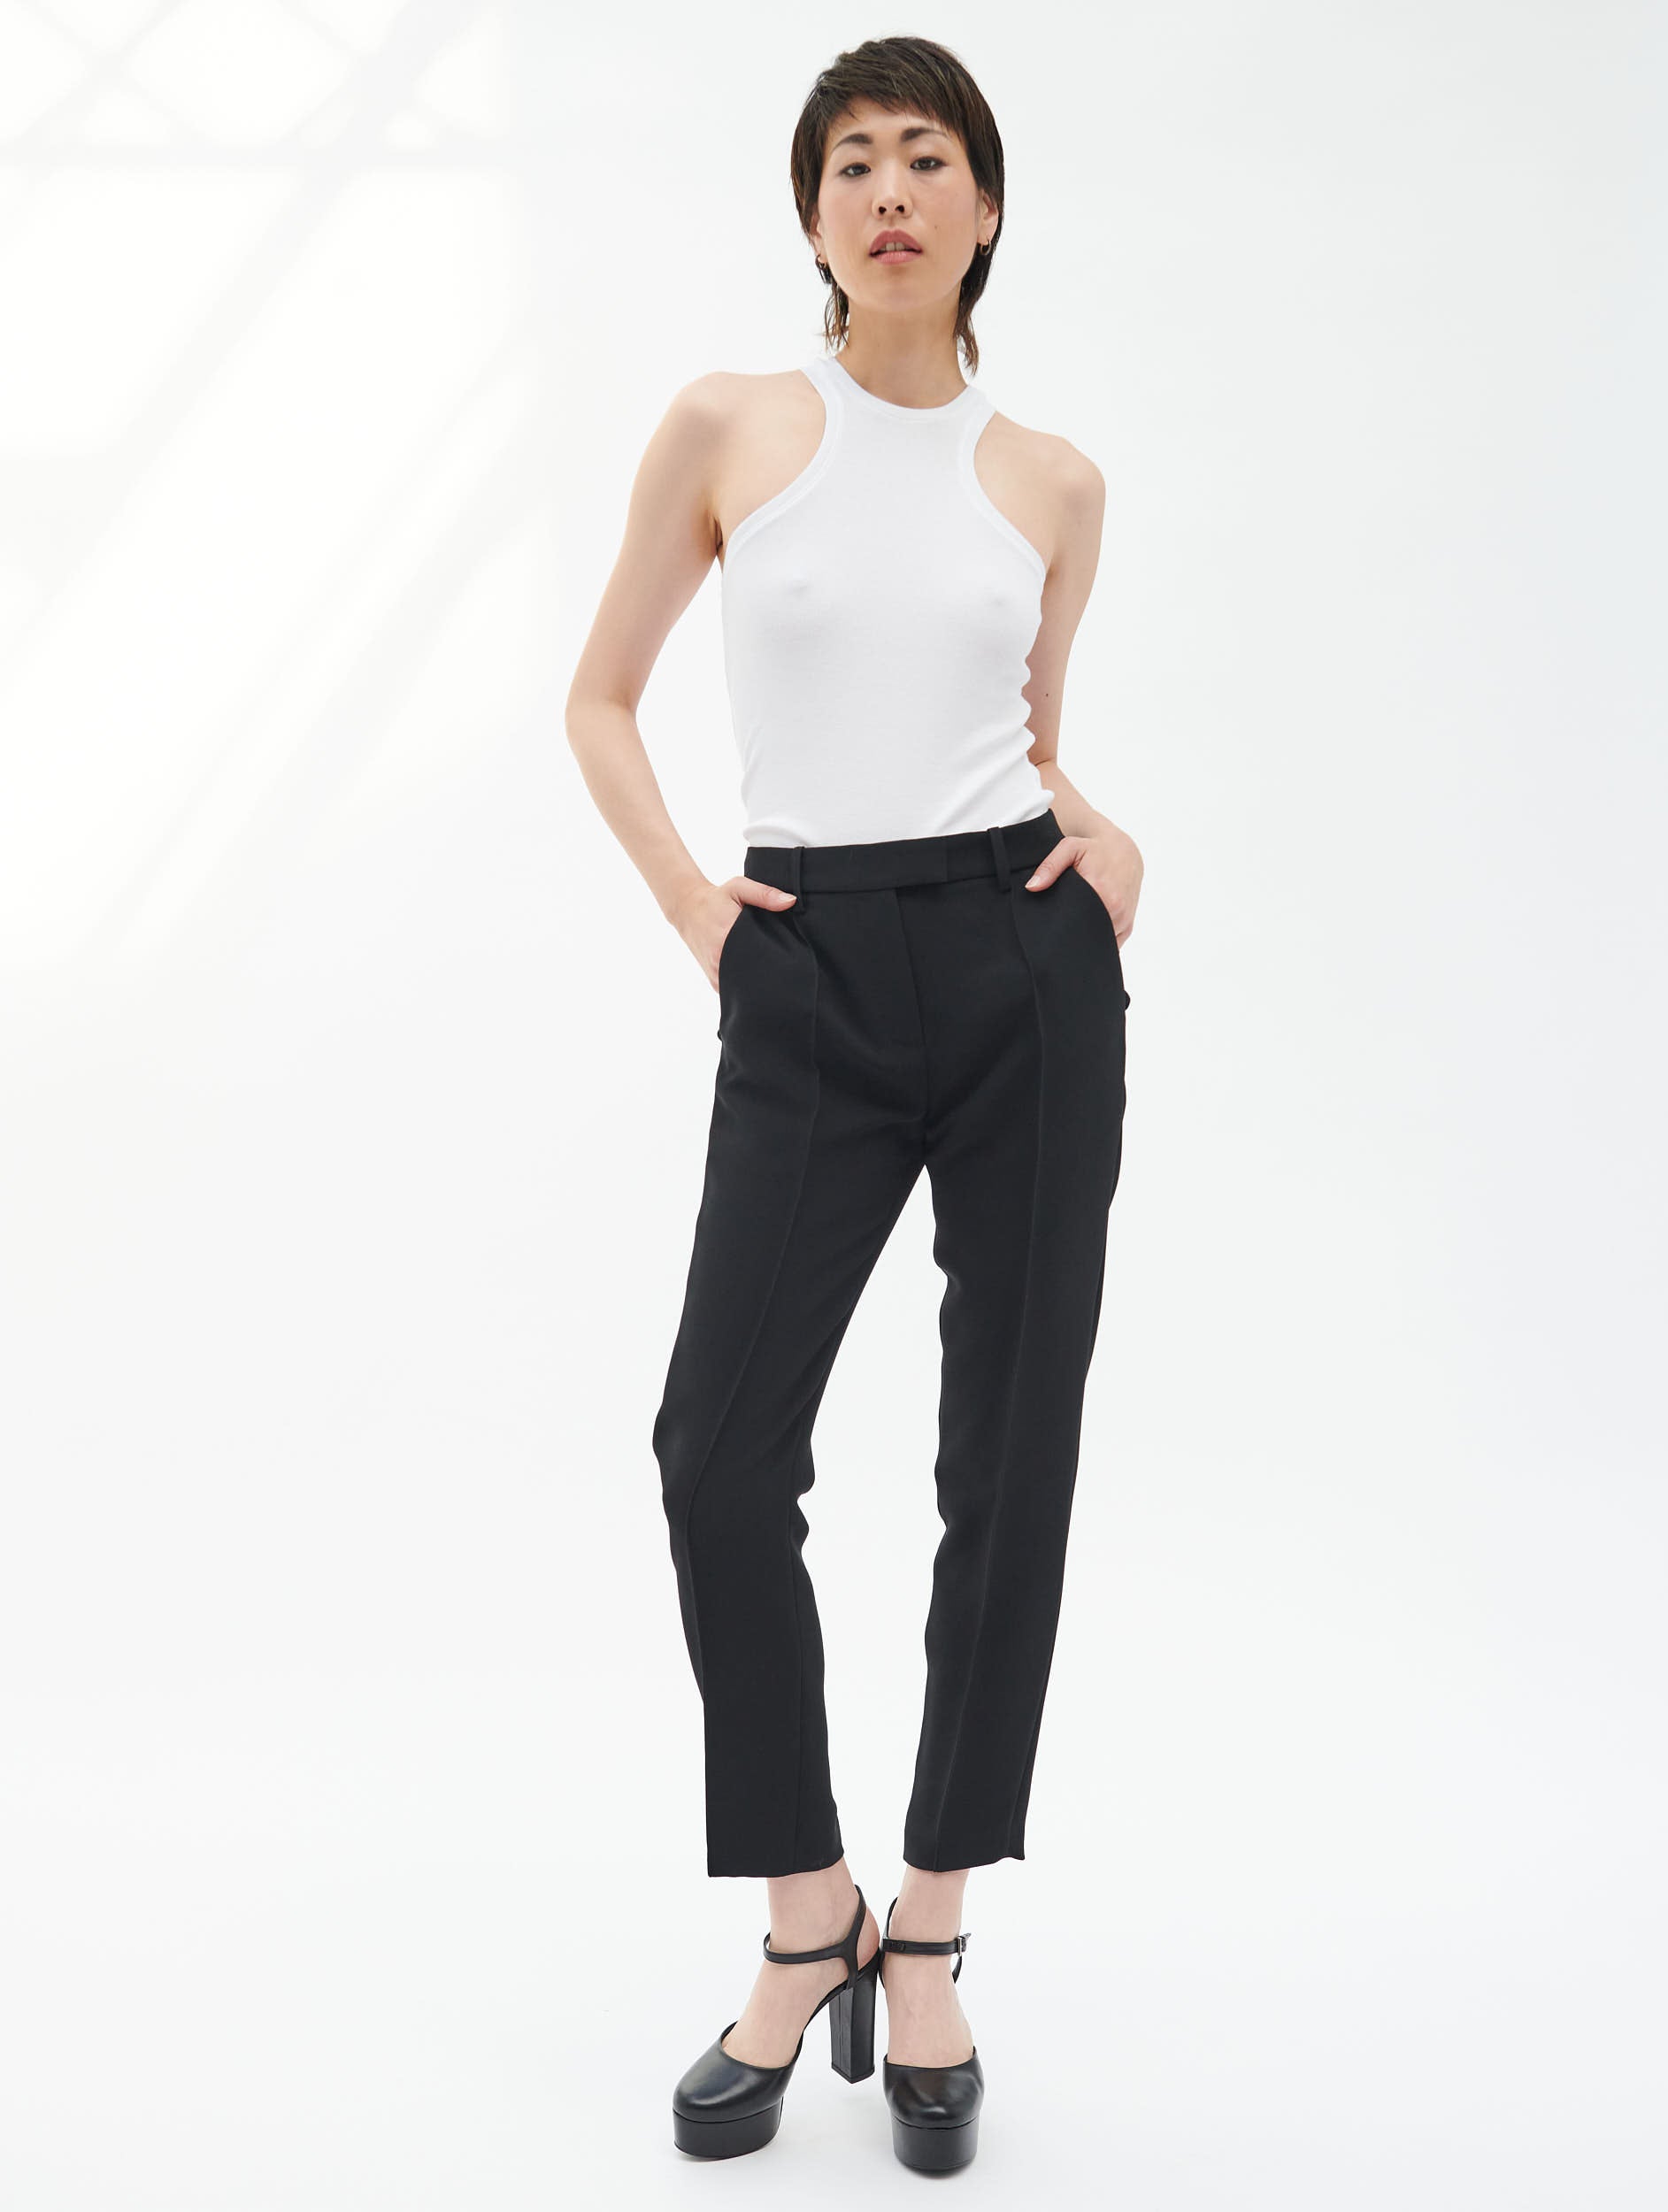 Roxy What A Vibe - Elasticated Waist Trousers For Women - Snow White |  SurfStitch